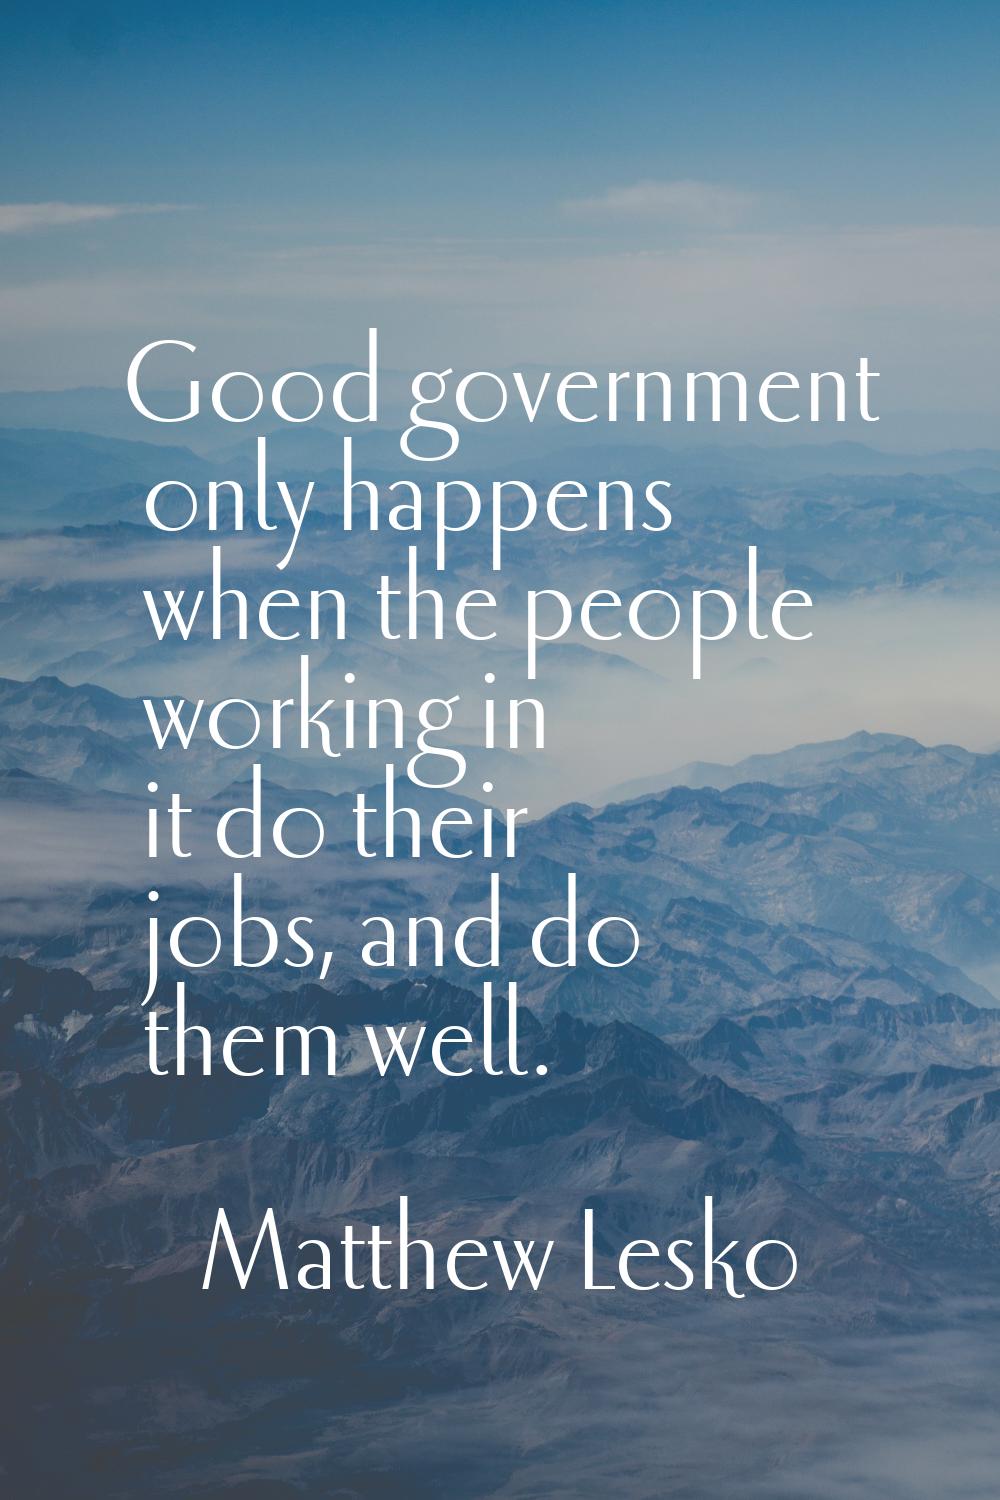 Good government only happens when the people working in it do their jobs, and do them well.